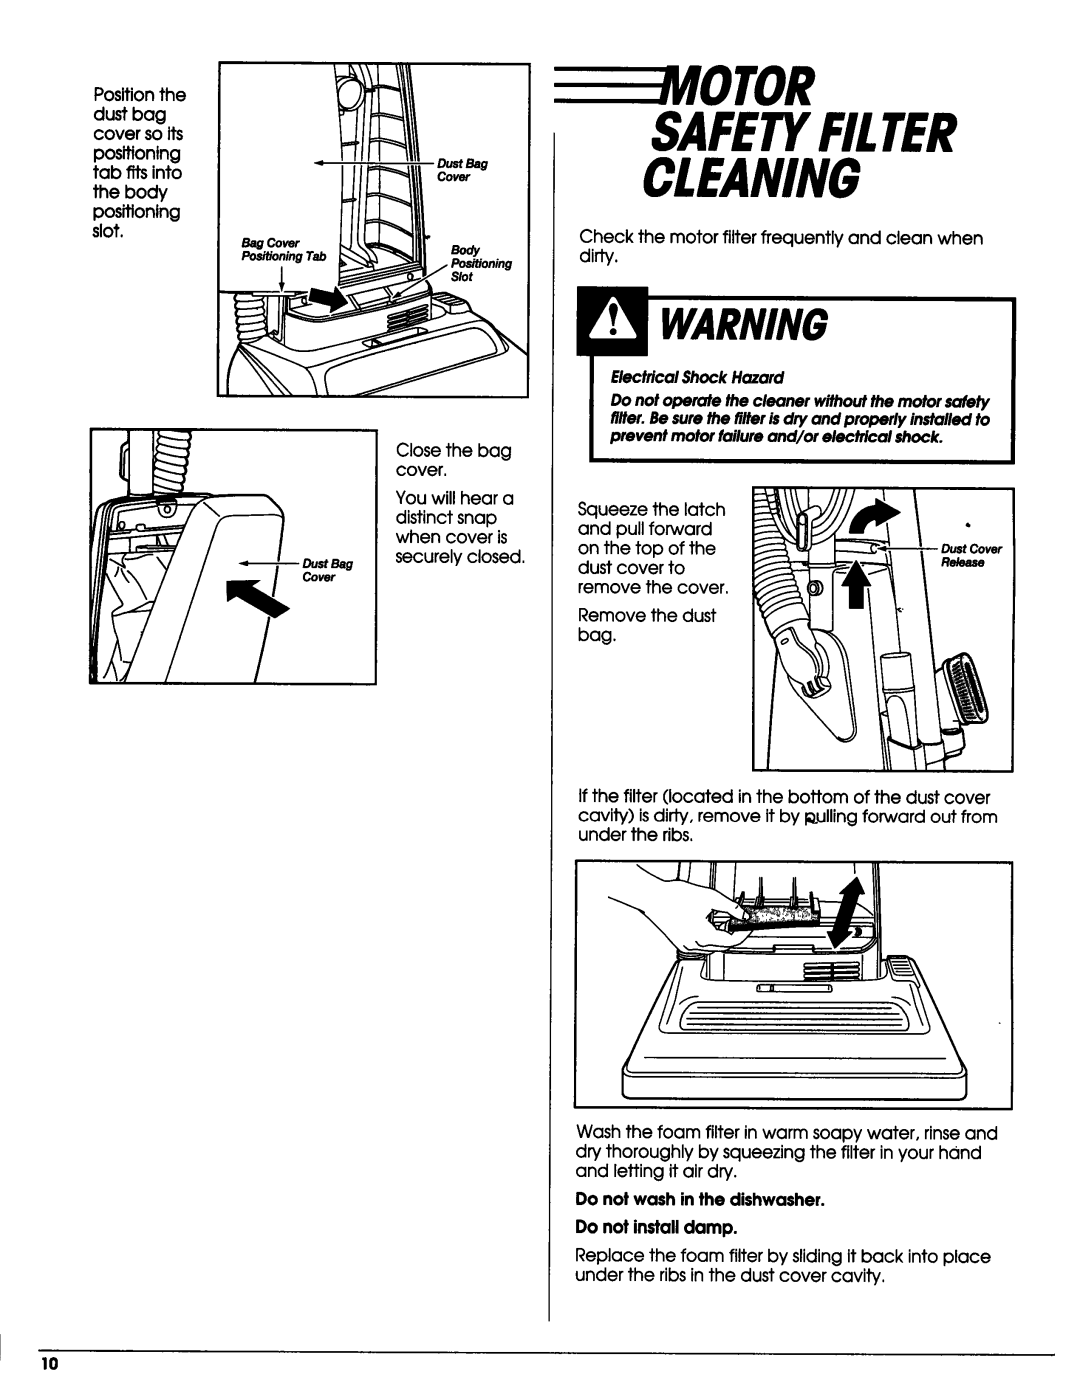 Sears Vacuum Cleaner owner manual Safetyfilter Cleanino, dustbag coverso its, ElectricalShock Hazard 